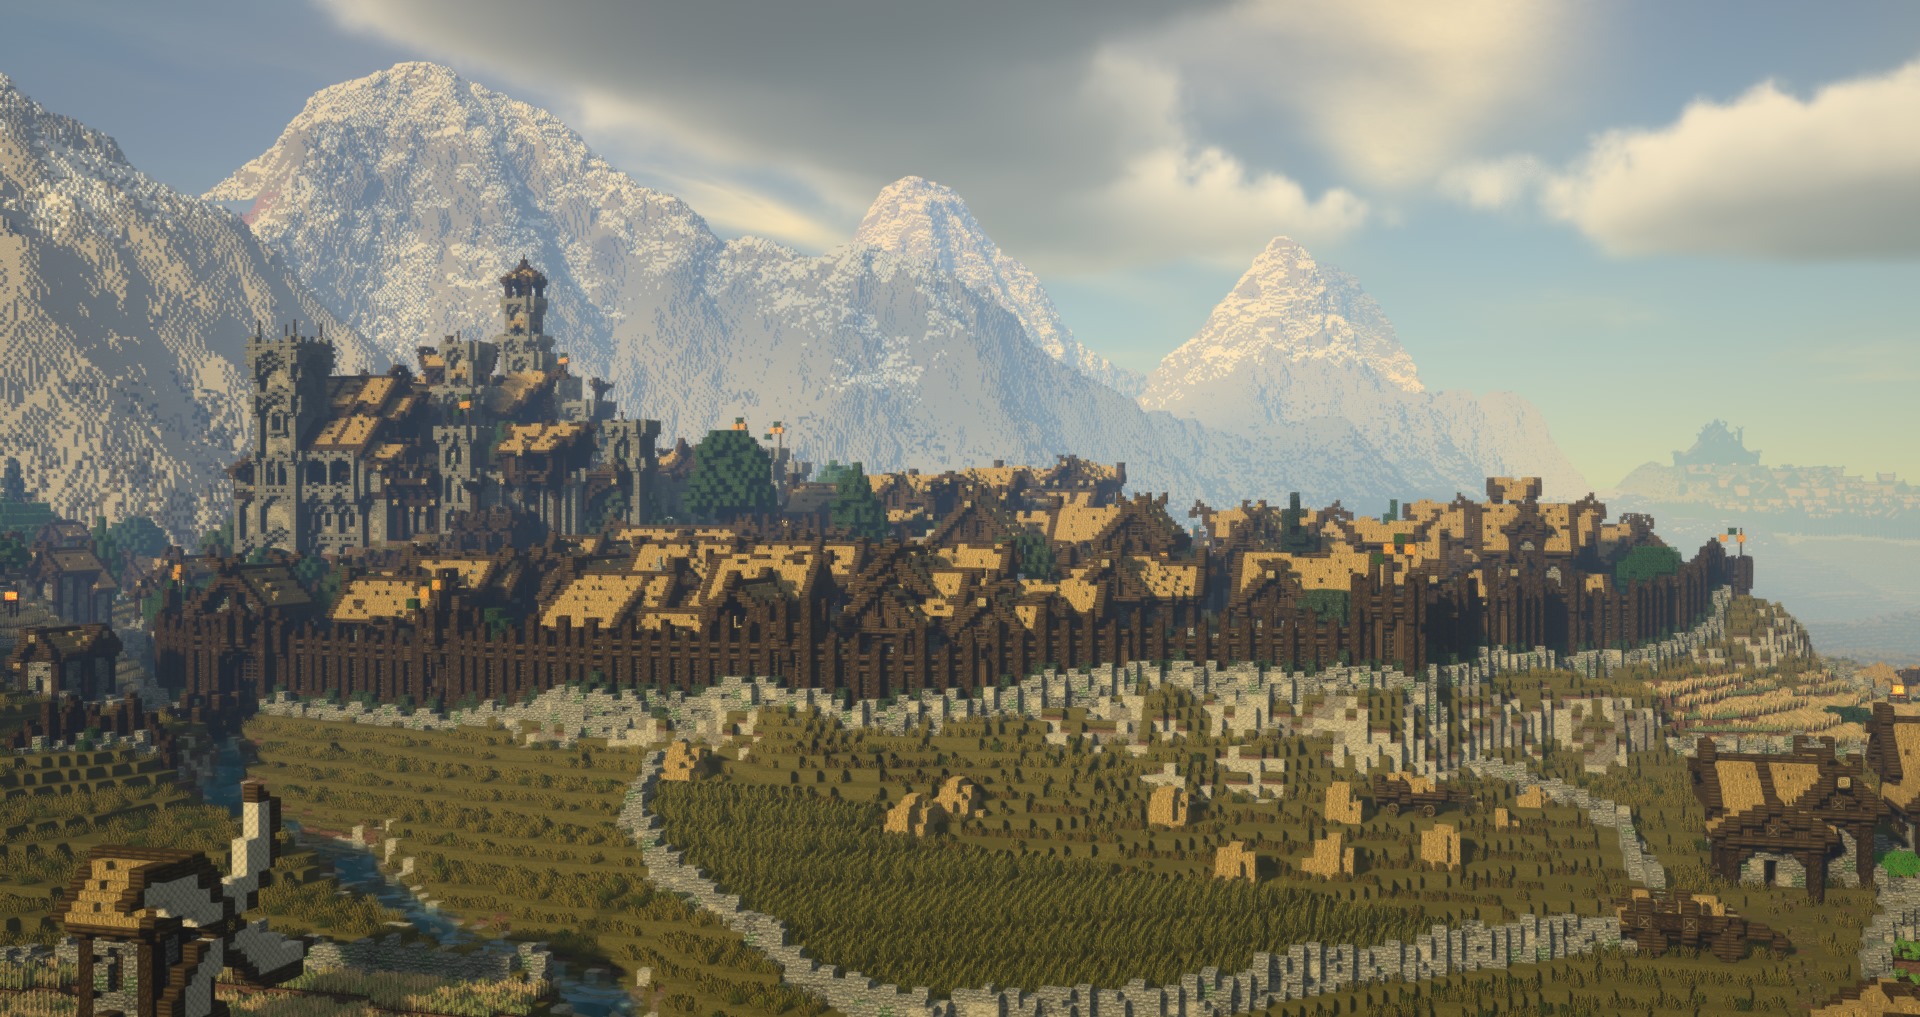 Meet the team who dedicated 10 years to building Middle-earth in Minecraft